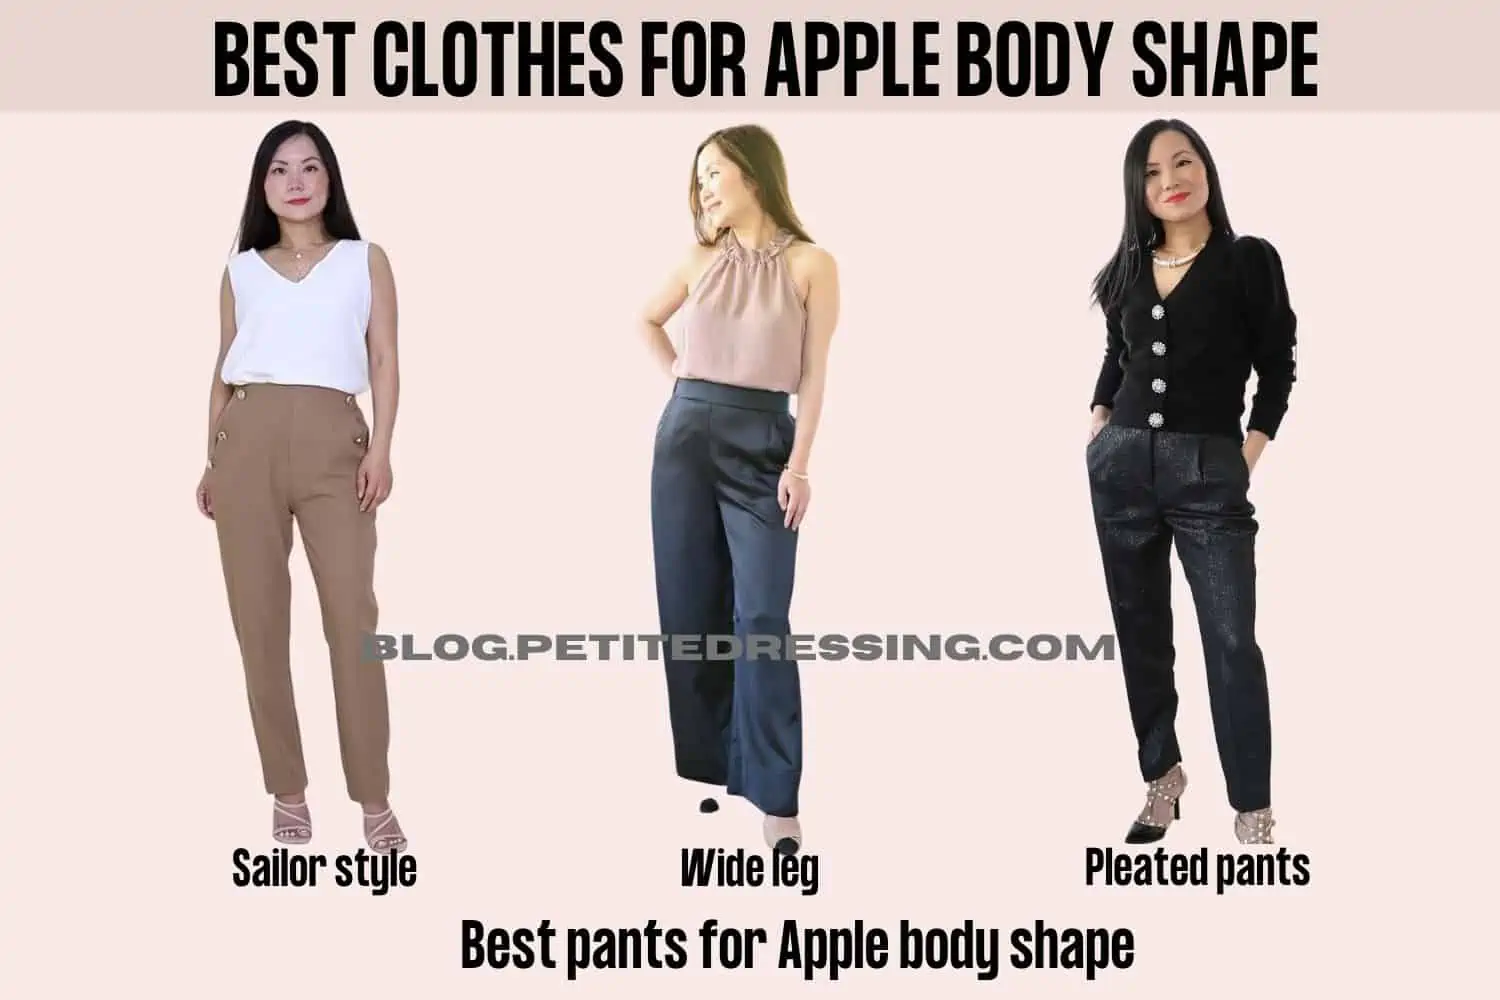 I have an apple-shaped body type – my favorite outfits ideas are